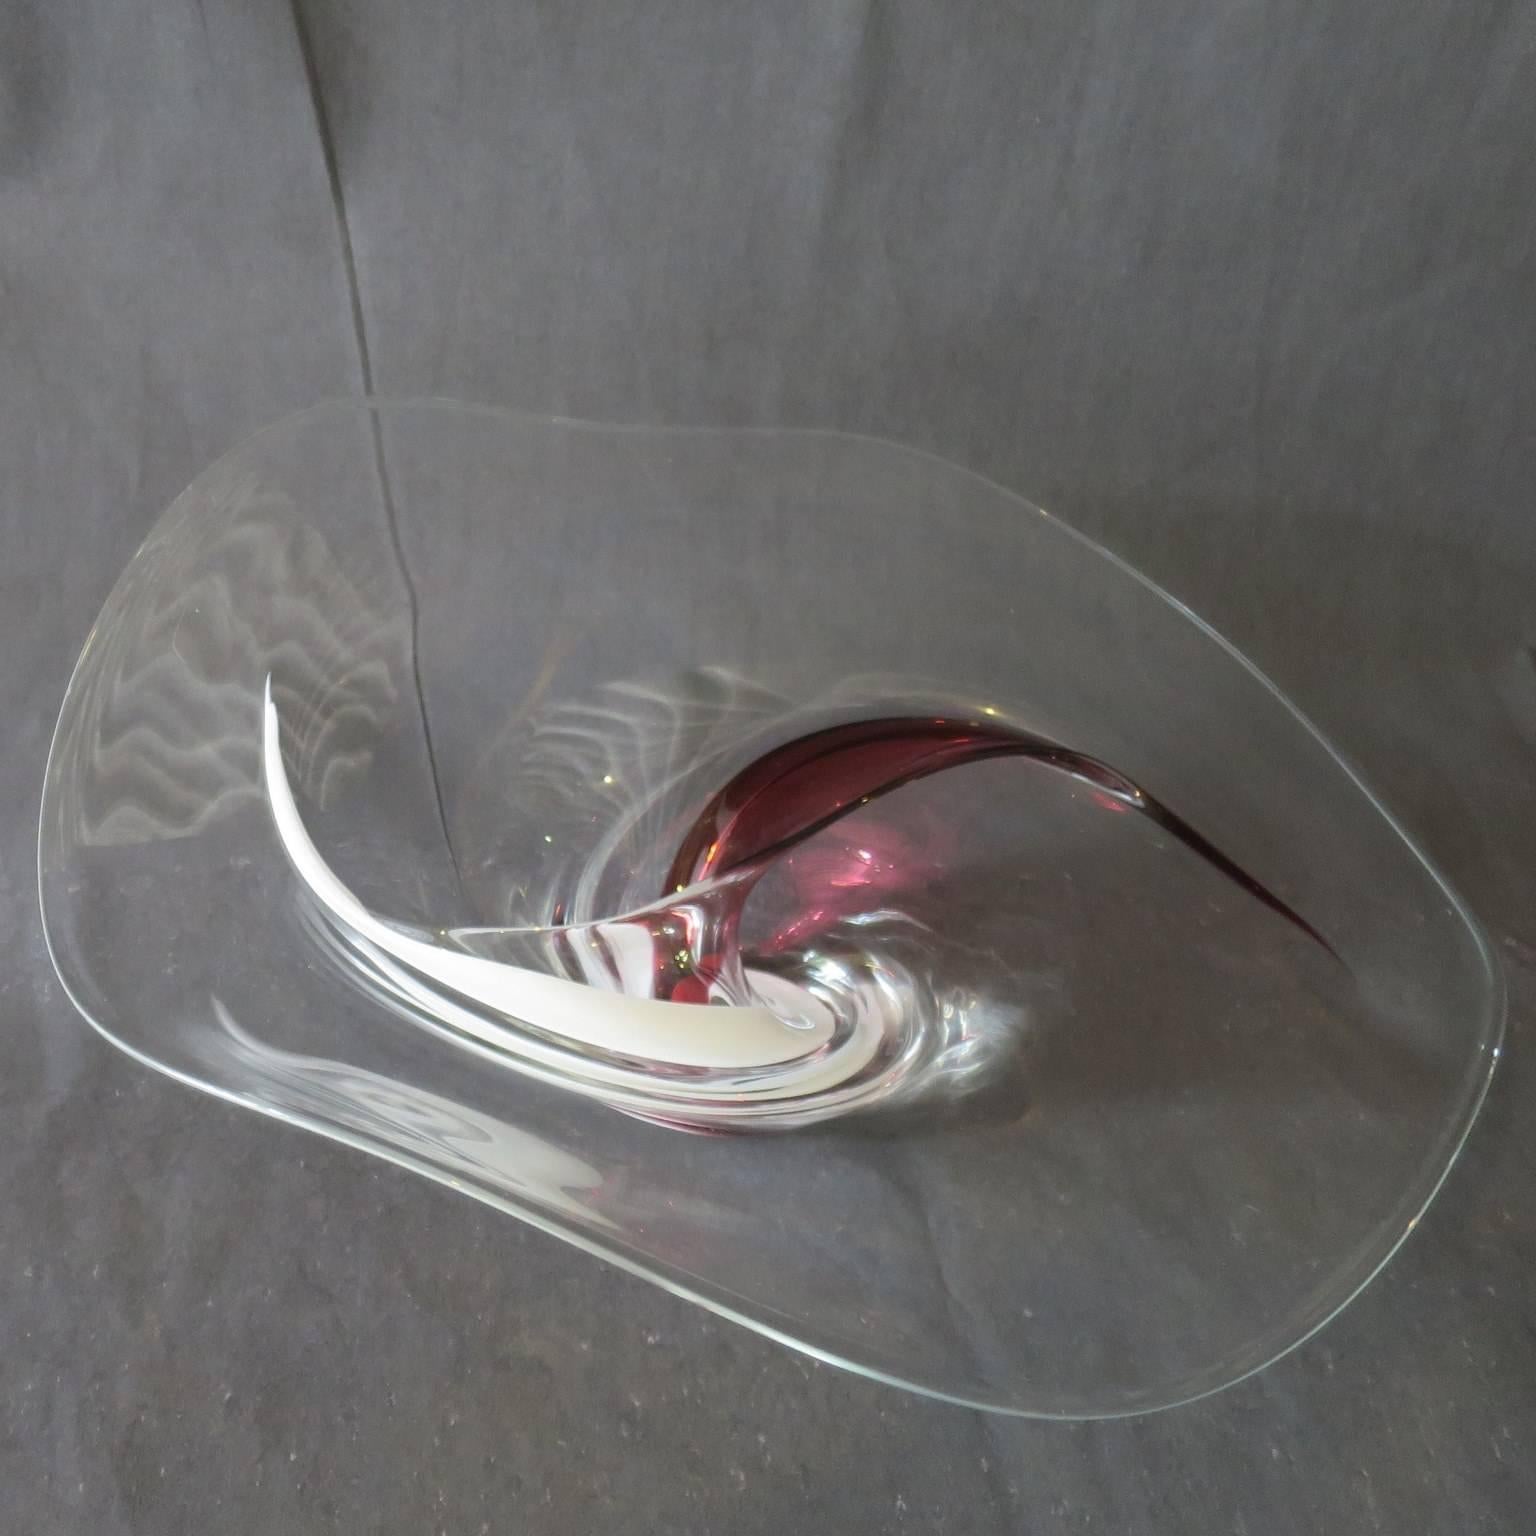 Scandinavian Modern By Michael Bang Unusual Blown Glass Bowl Signed and Dated 1988, Mid-Century